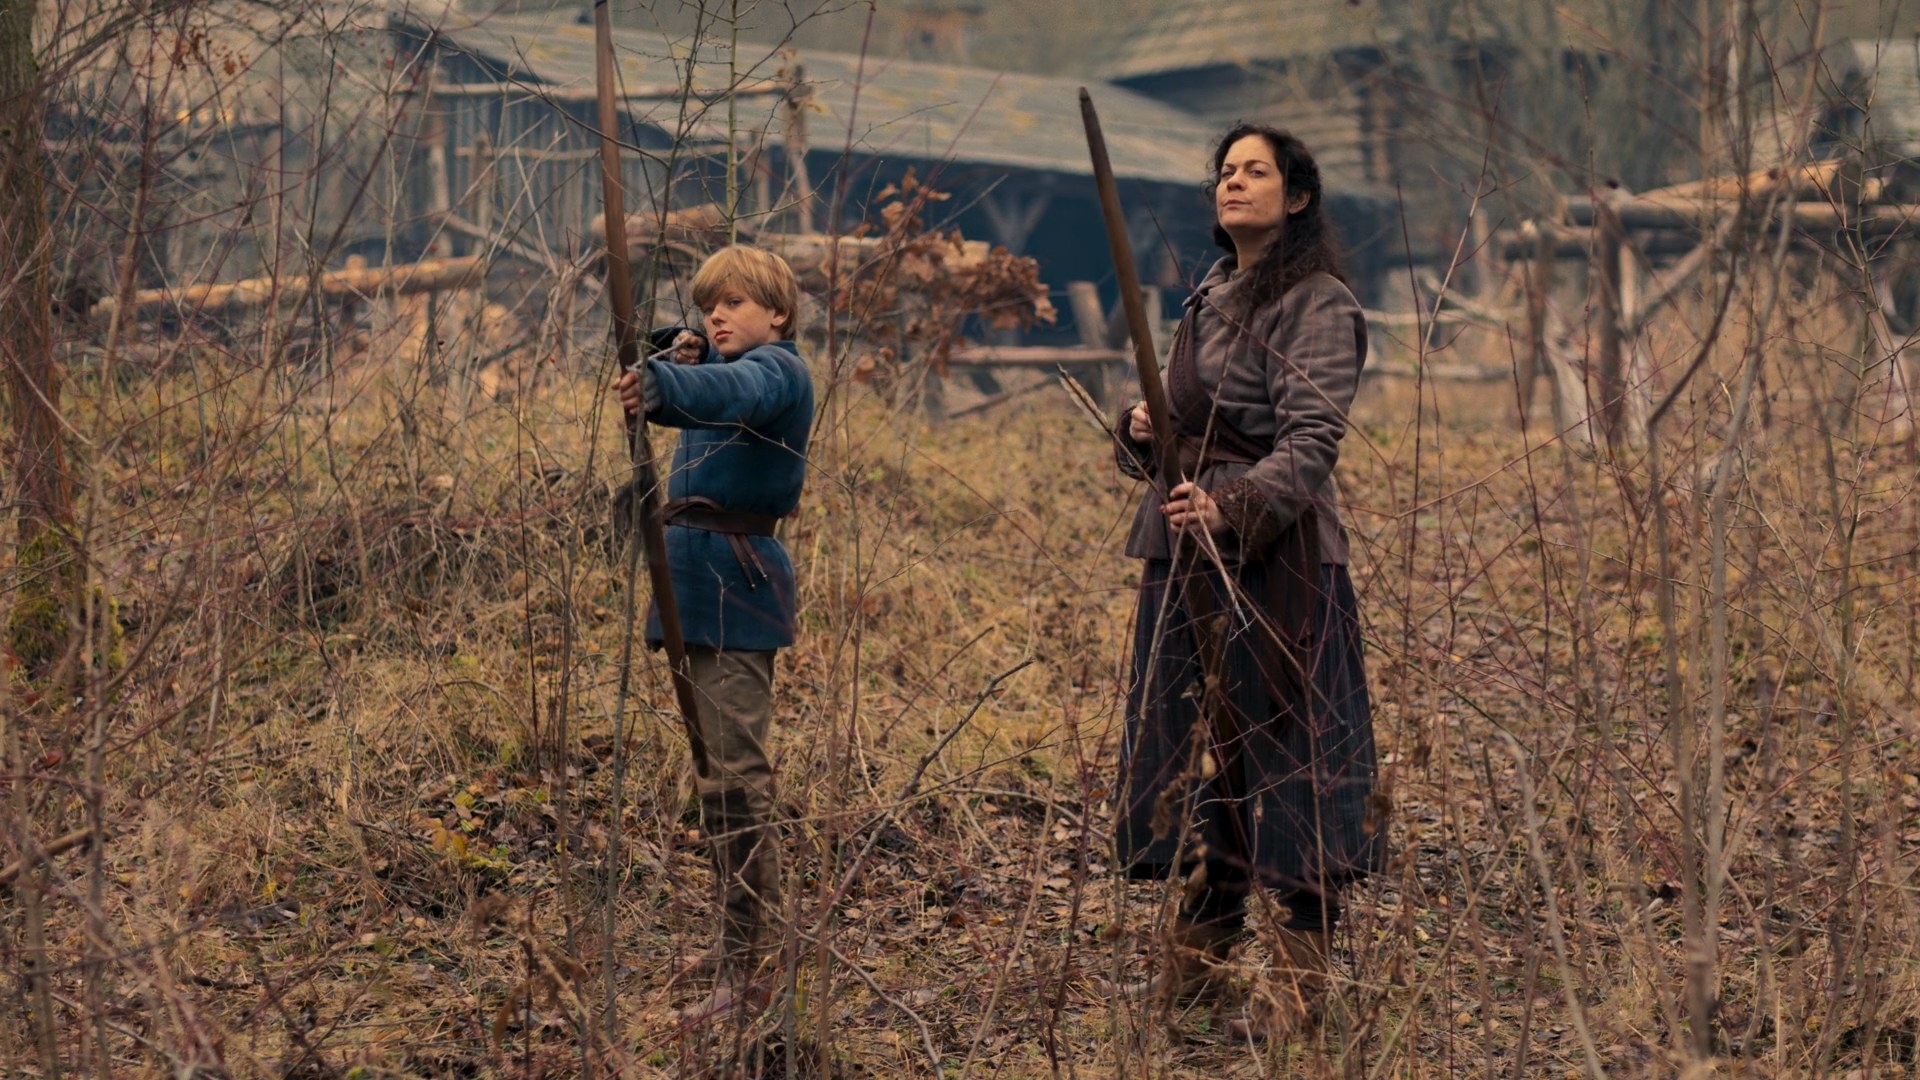 A shot of Mrs Grinwell (Jennifer Preston) and her son (David Dvorscik) with bows drawn outside of a rural farm. They look on suspiciously as they stand in the thicket.